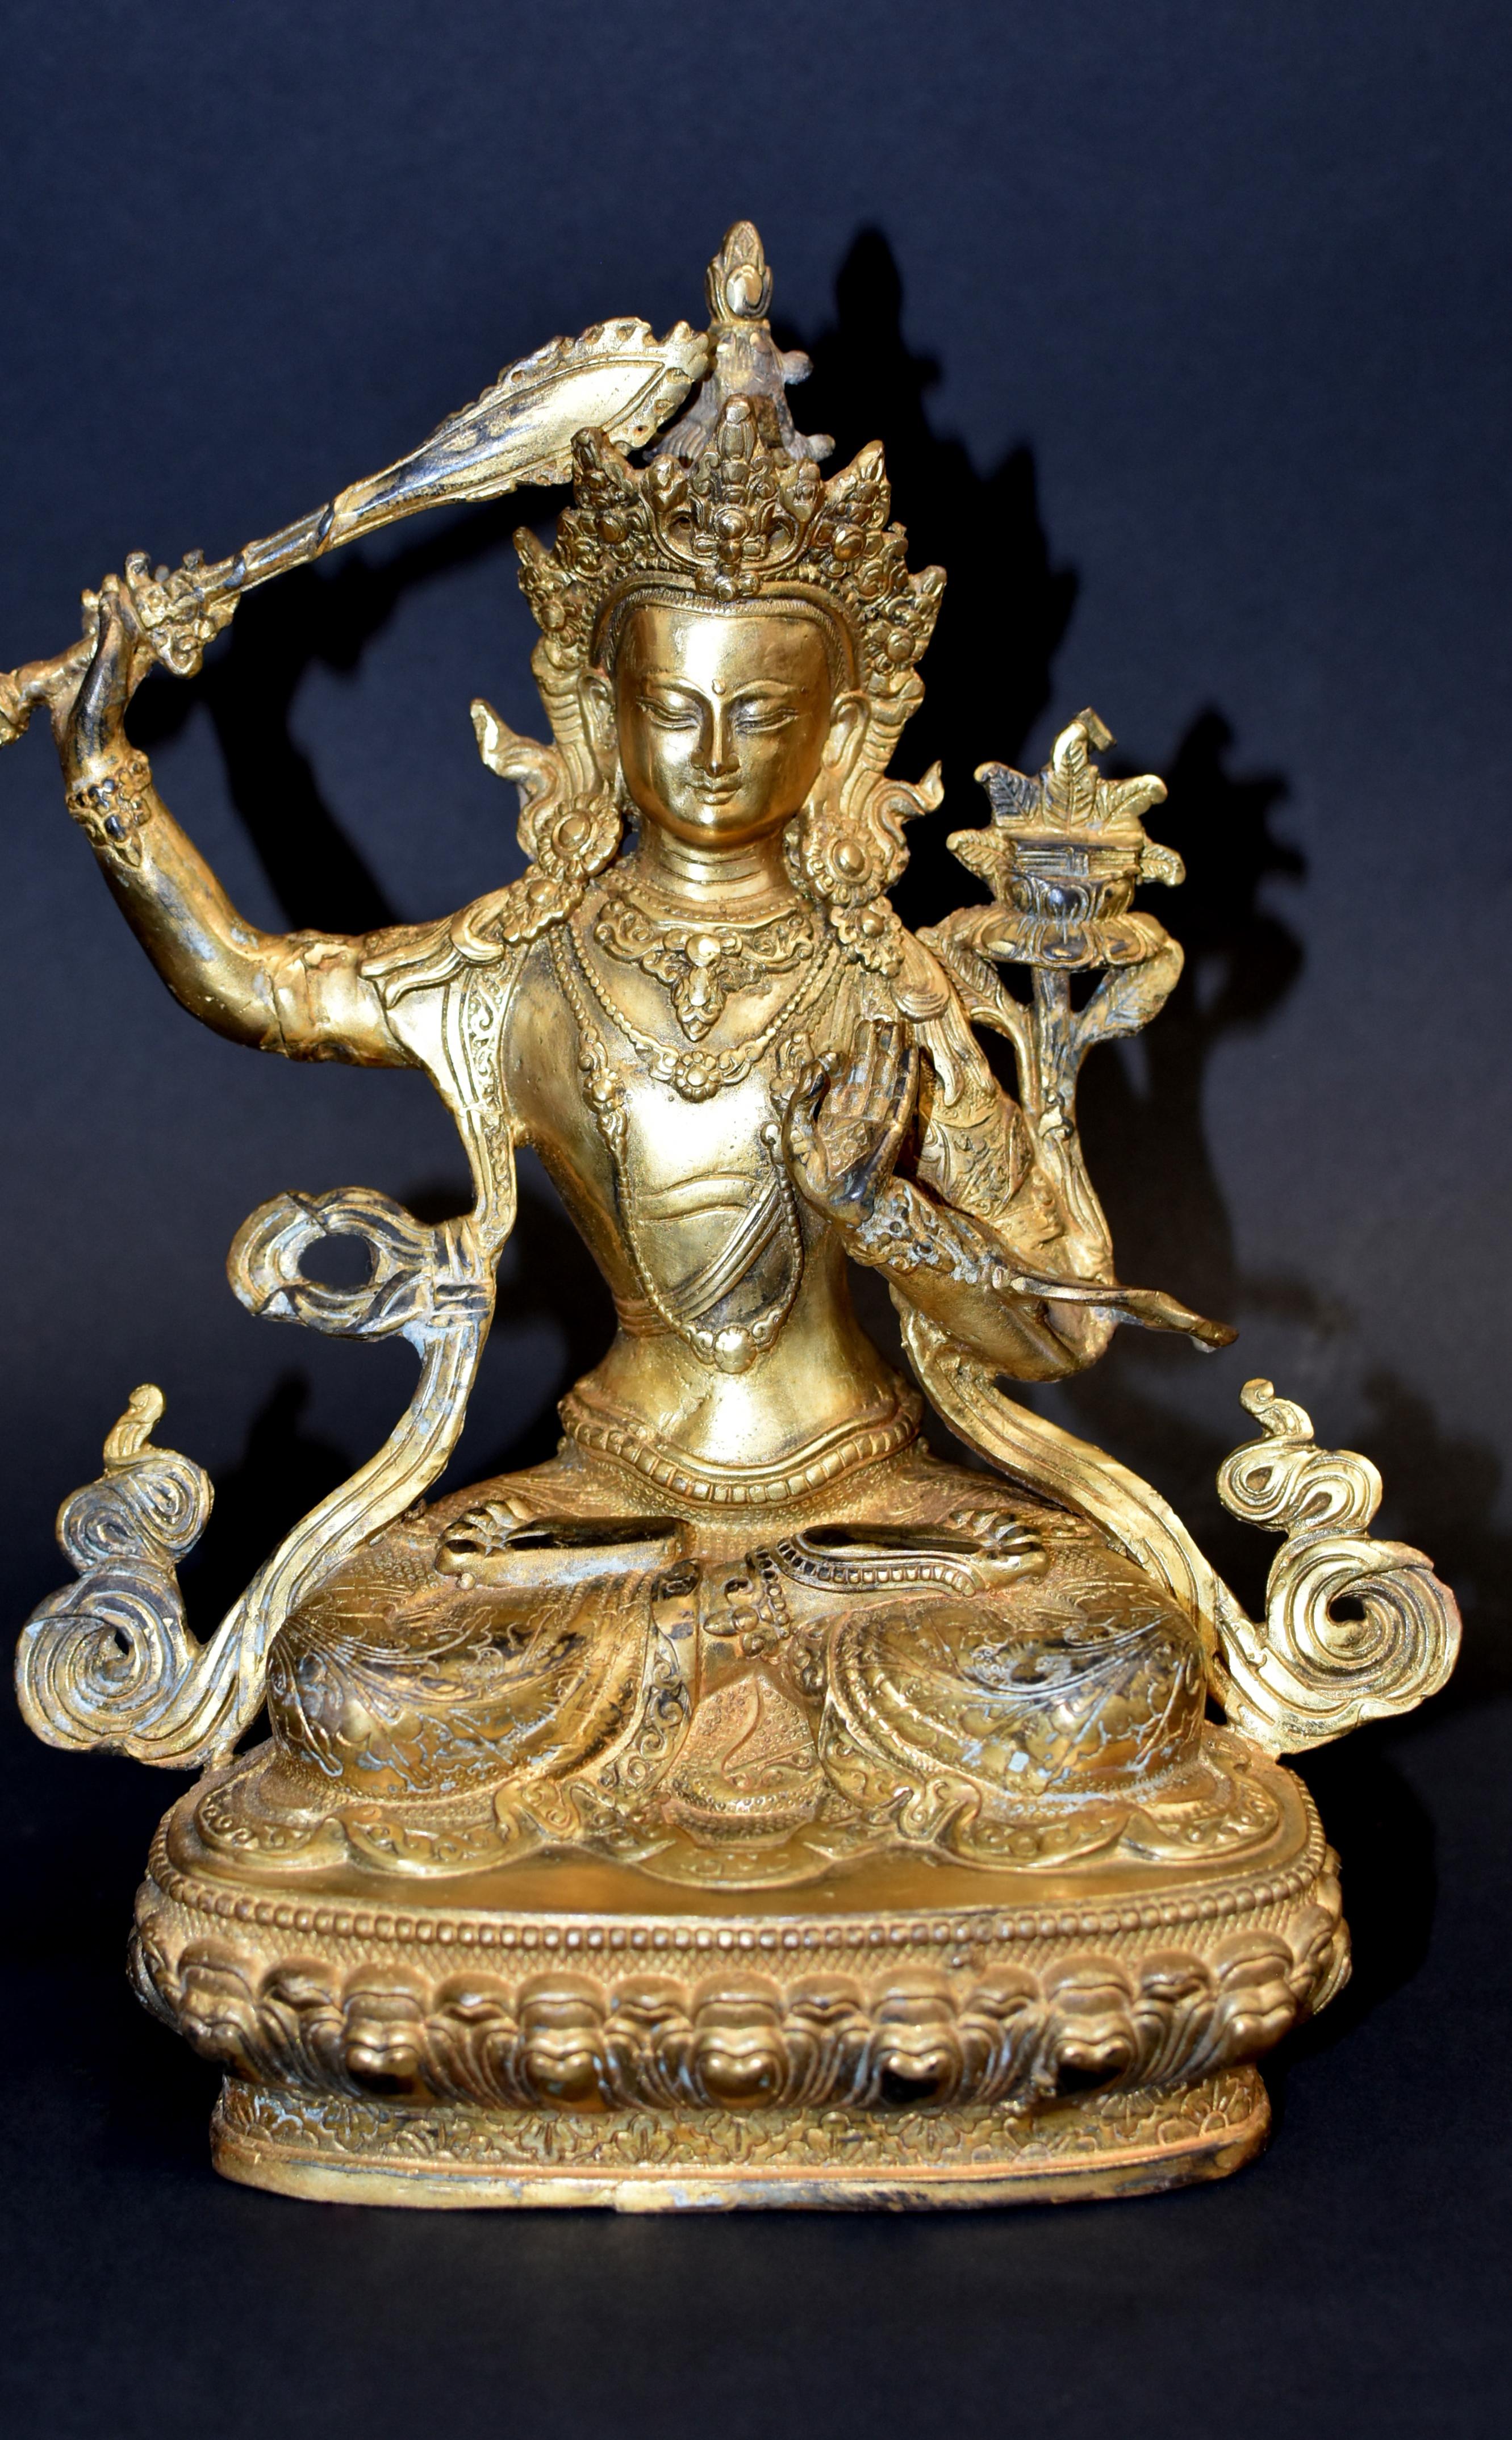 A beautiful gilt bronze, 3.4 lb, statue of Tibetan Bodhisattva Manjushree. Legend has it that he cuts water with the sword to divide the water resource to irrigate dry valleys. In Tibetan Buddhism, Mañjusri also manifests in a wrathful tantric form